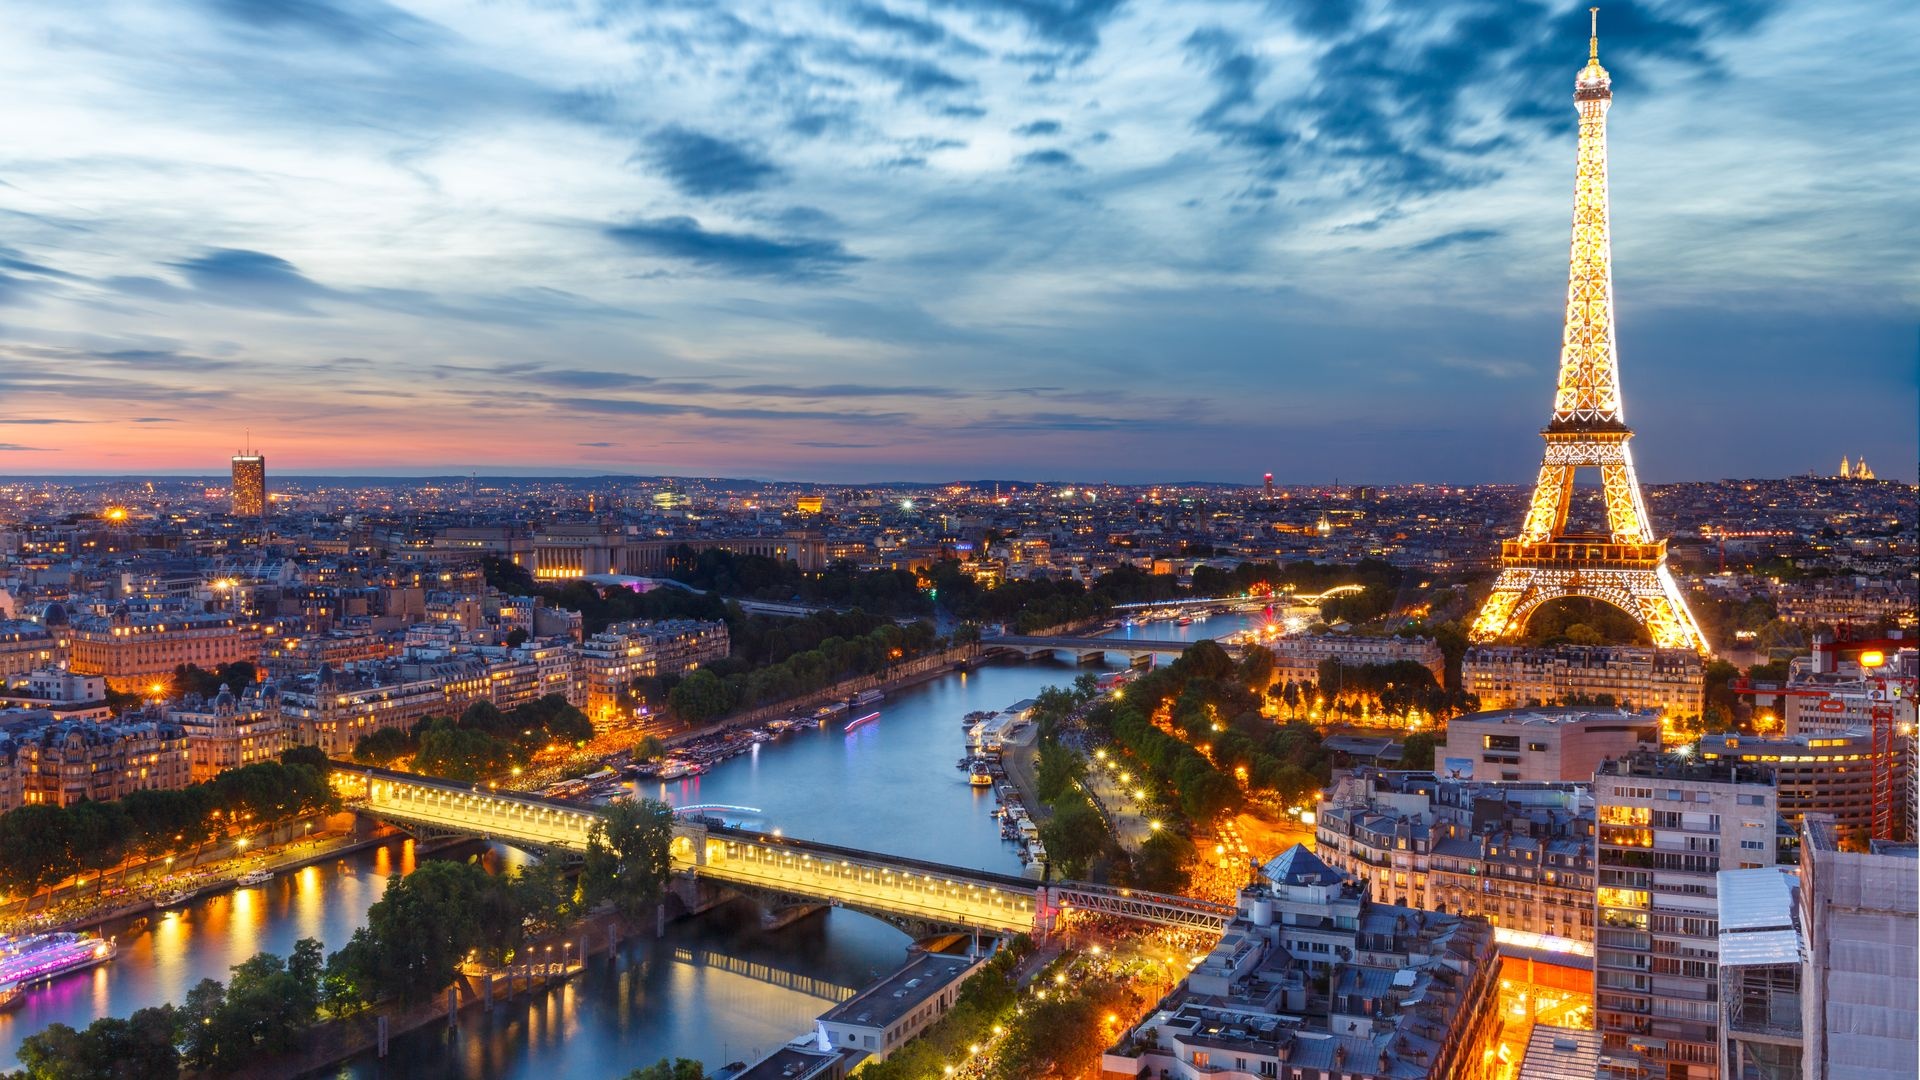 Paris: One of the foremost cities of the 21st century, City of love. 1920x1080 Full HD Wallpaper.